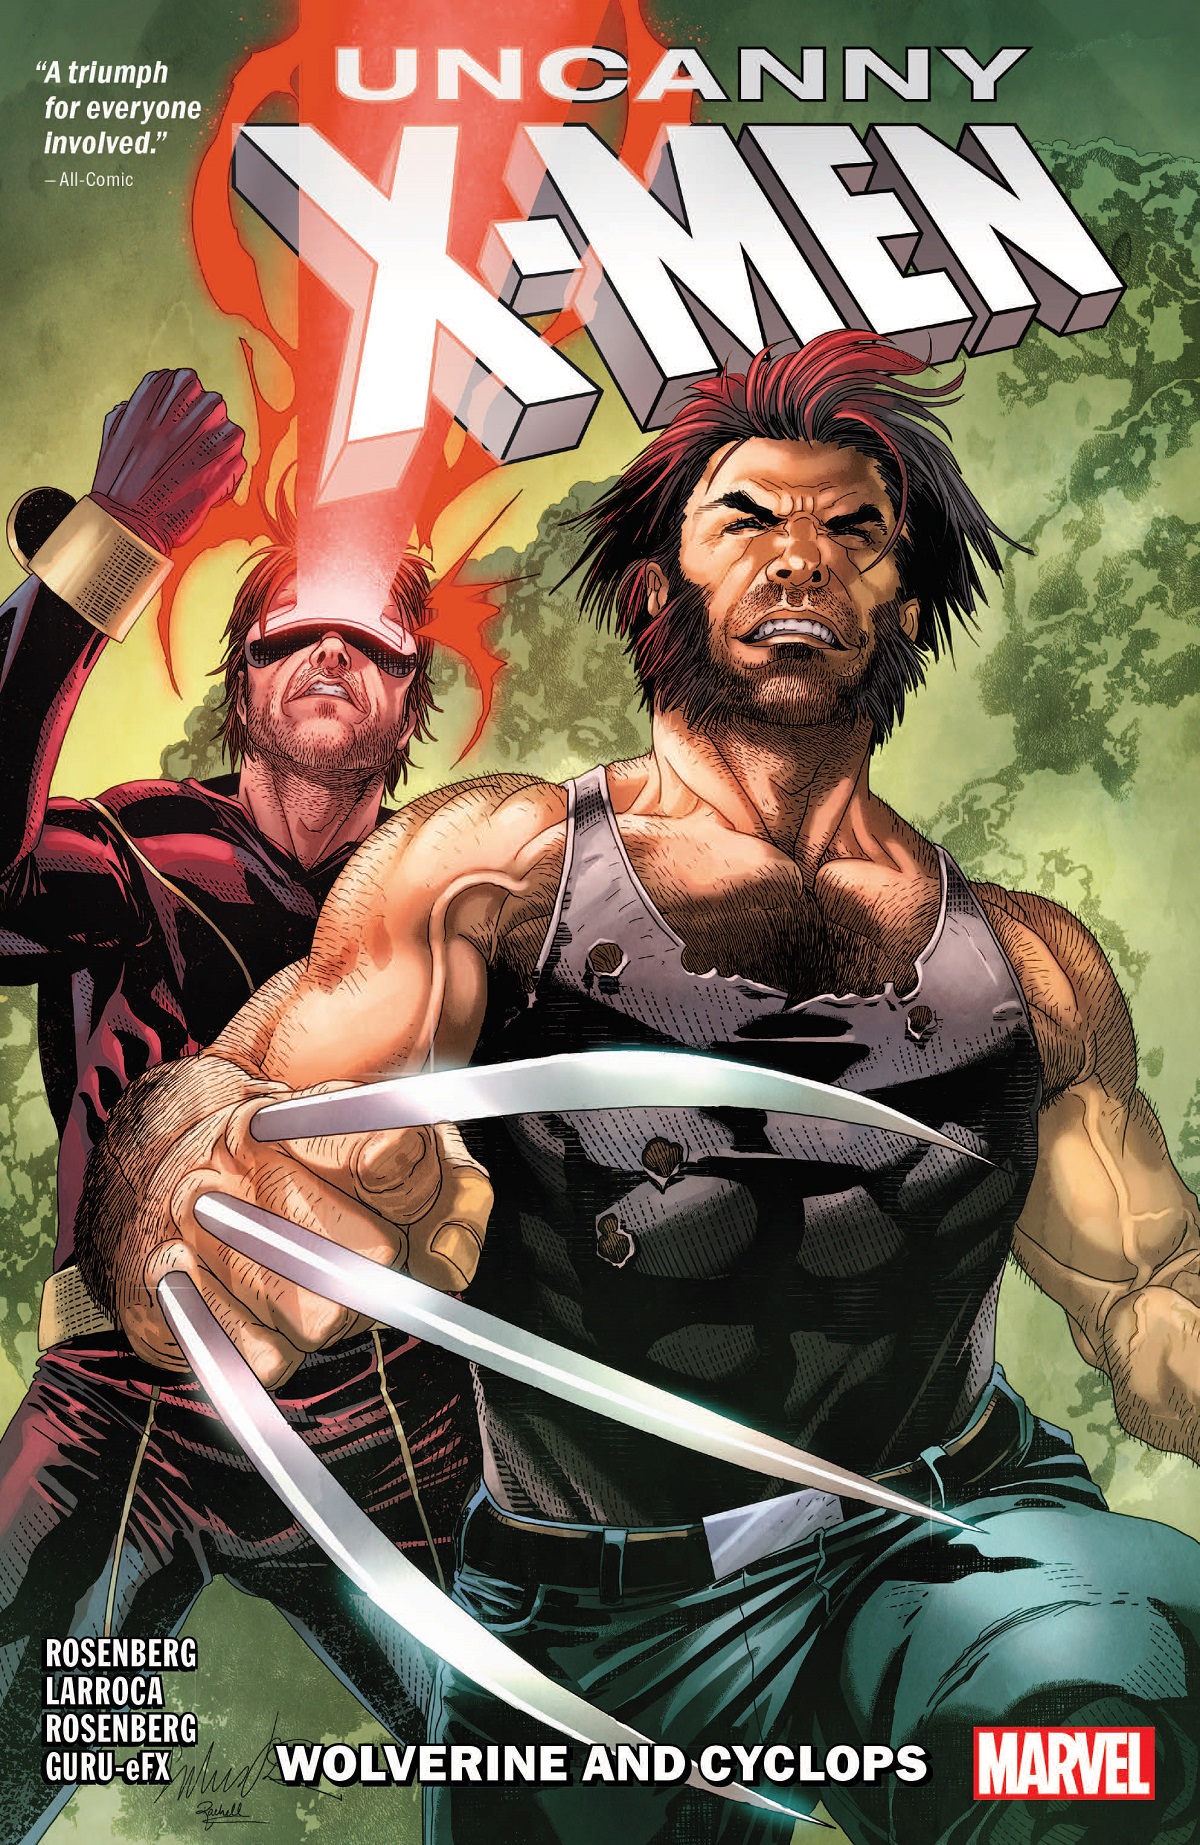 UNCANNY X-MEN: WOLVERINE AND CYCLOPS VOL. 1 TPB (Trade Paperback)